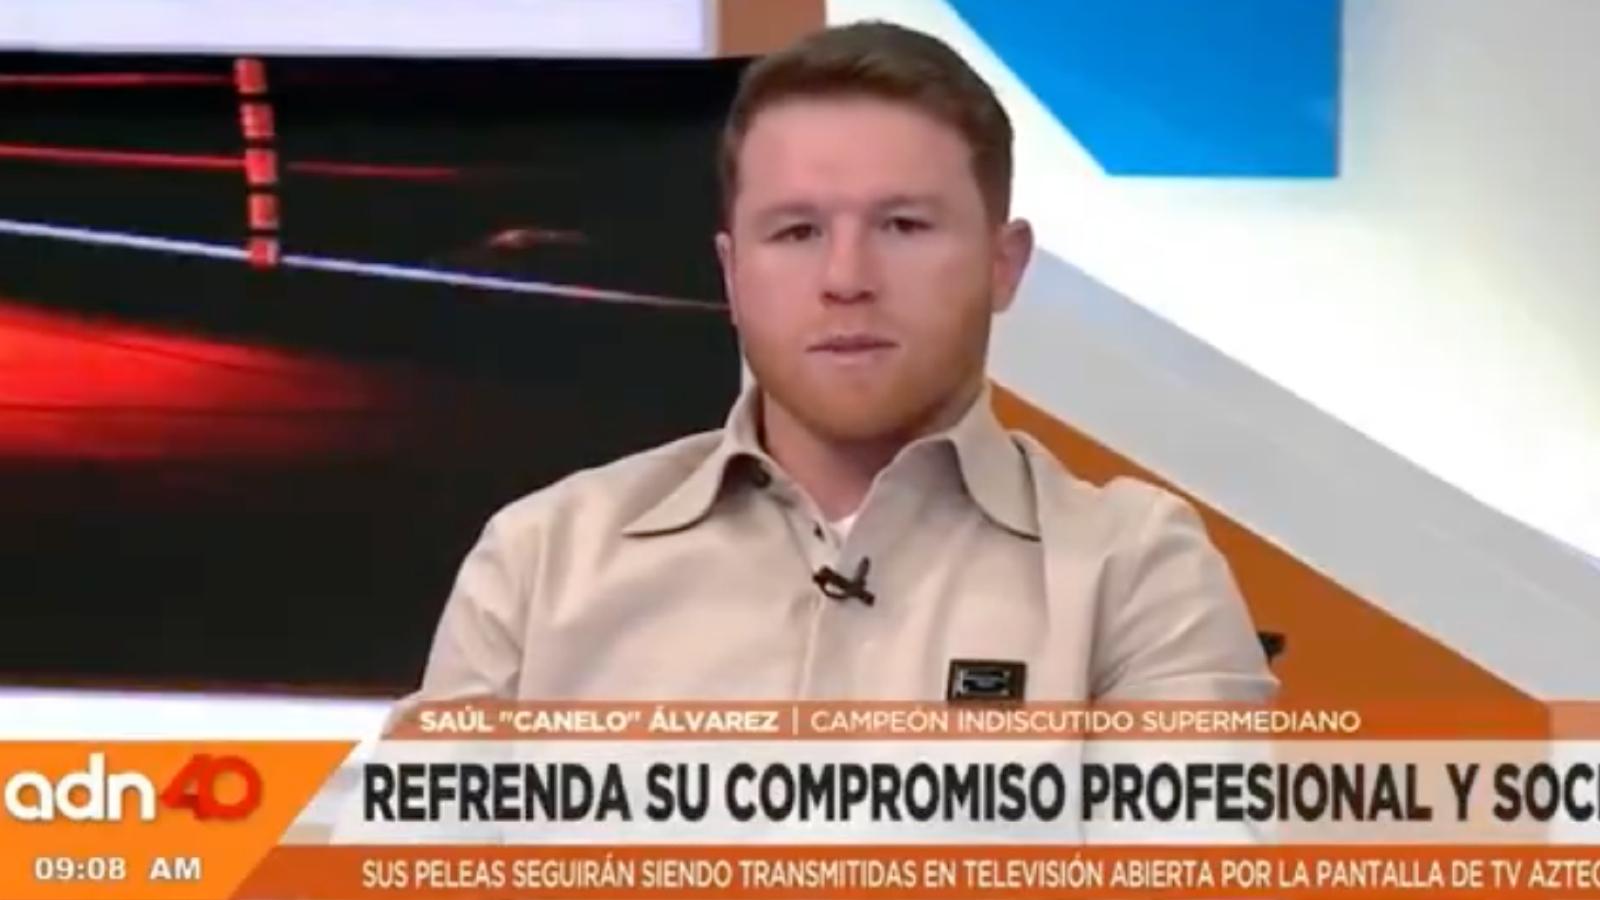 Canelo's next fight will be in May